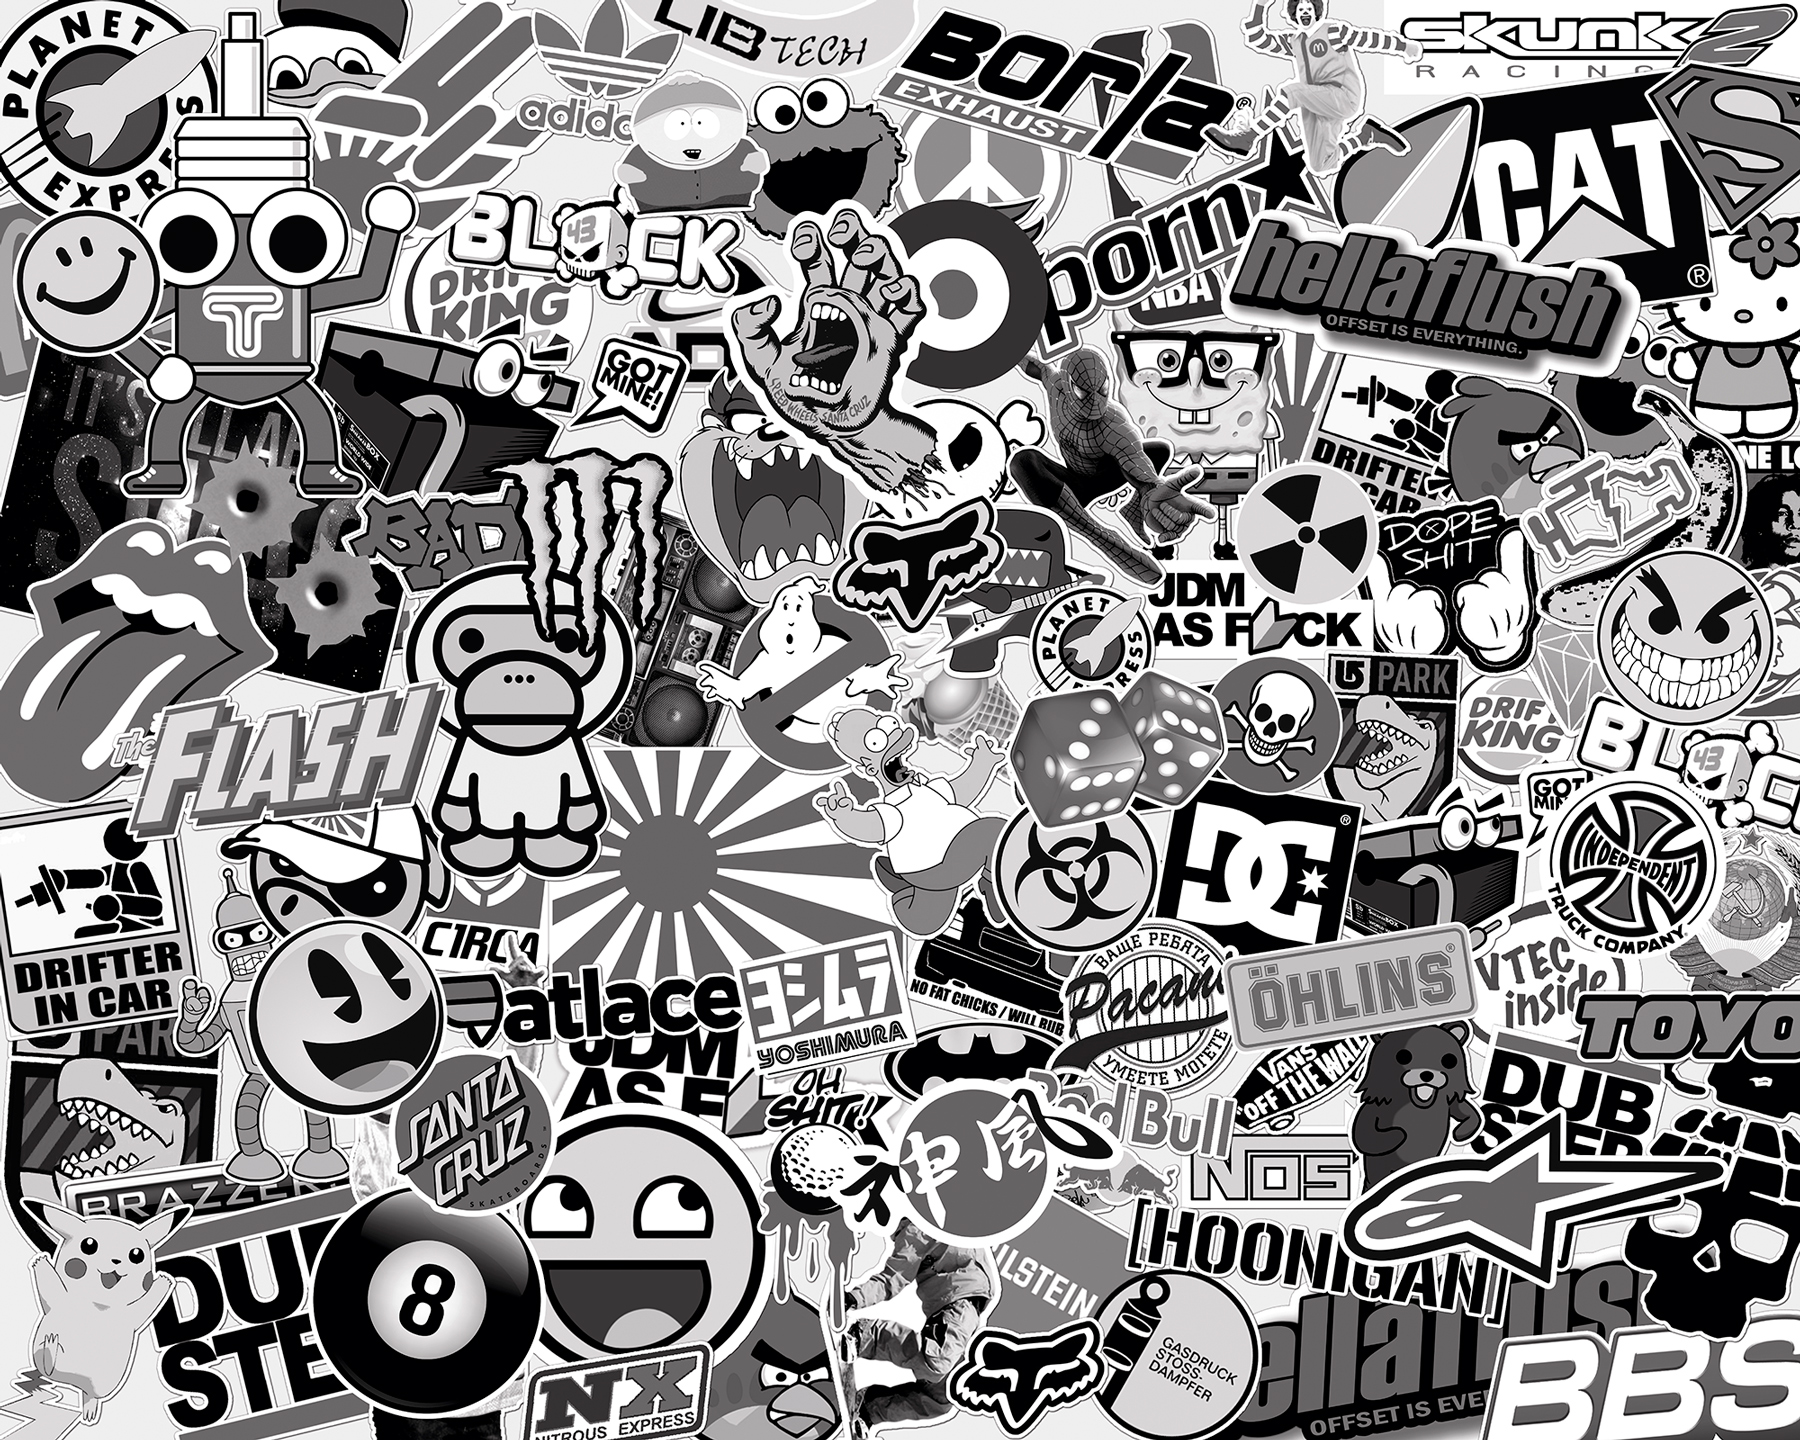 Sticker Bomb Wallpaper Black And White Hd Wallpaper Backgrounds Download